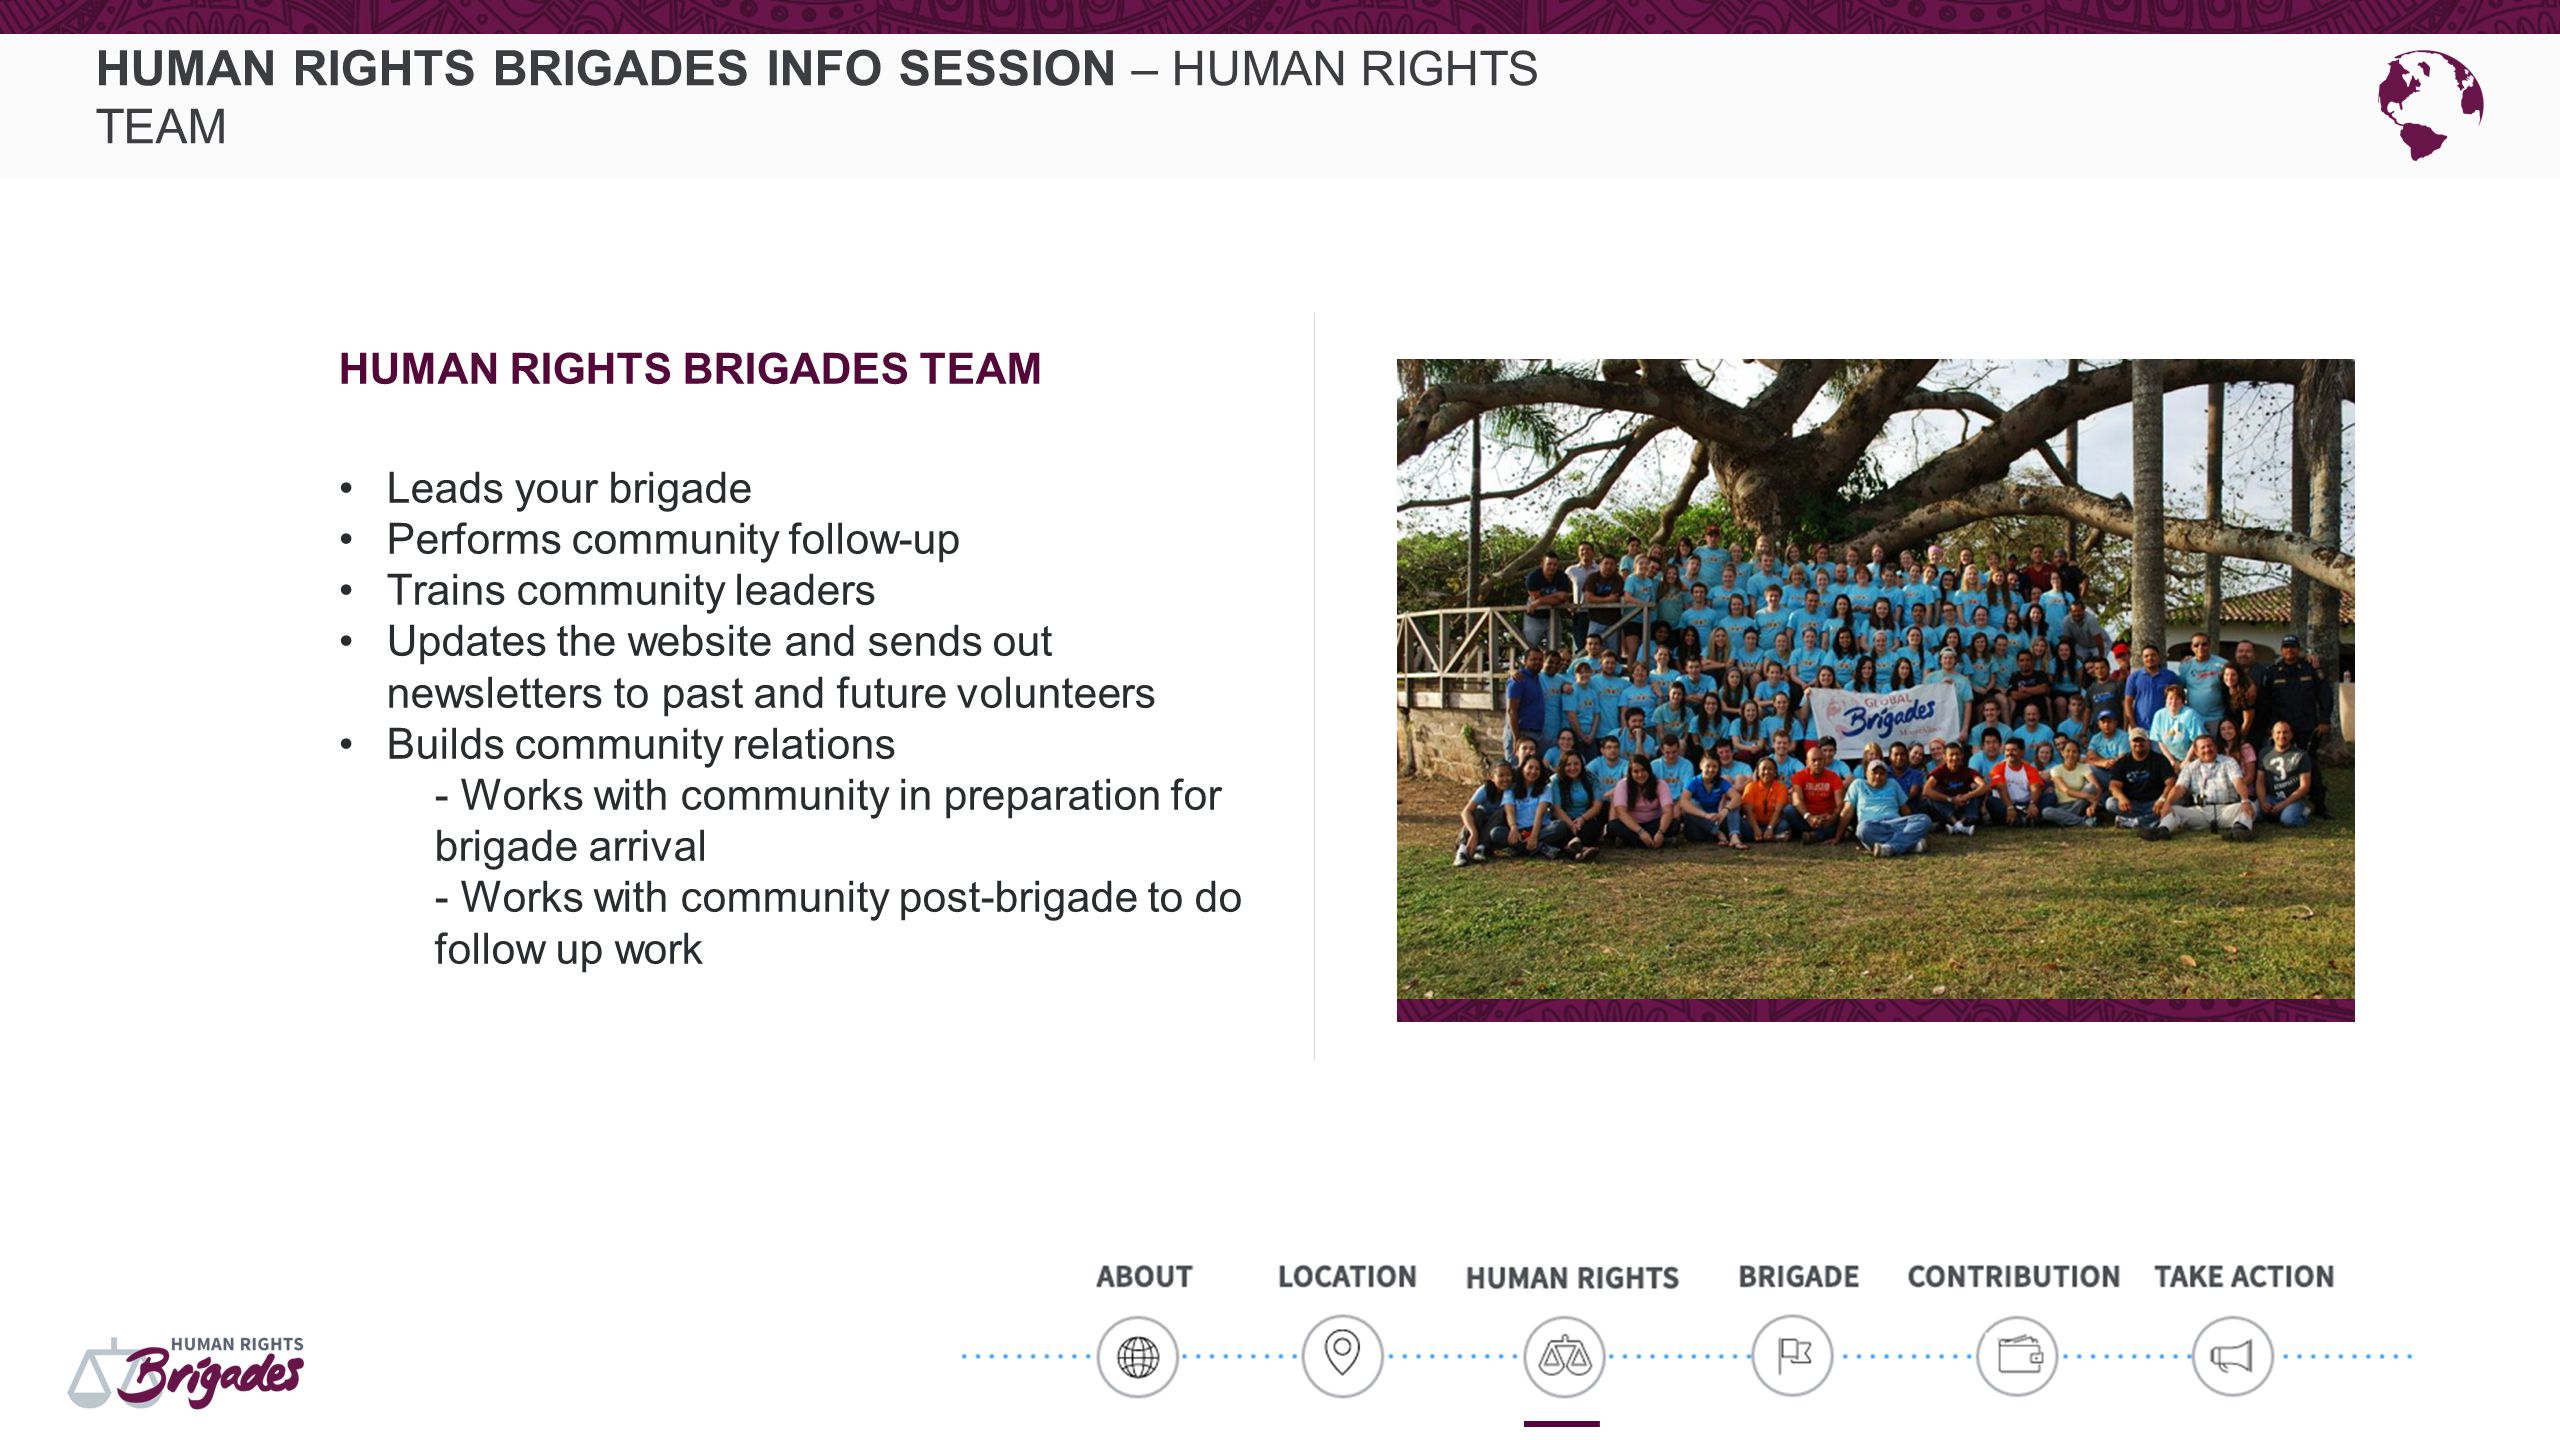 HUMAN RIGHTS BRIGADES INFO SESSION – HUMAN RIGHTS TEAM HUMAN RIGHTS BRIGADES TEAM Leads your brigade Performs community follow-up Trains community leaders Updates the website and sends out newsletters to past and future volunteers Builds community relations - Works with community in preparation for brigade arrival - Works with community post-brigade to do follow up work